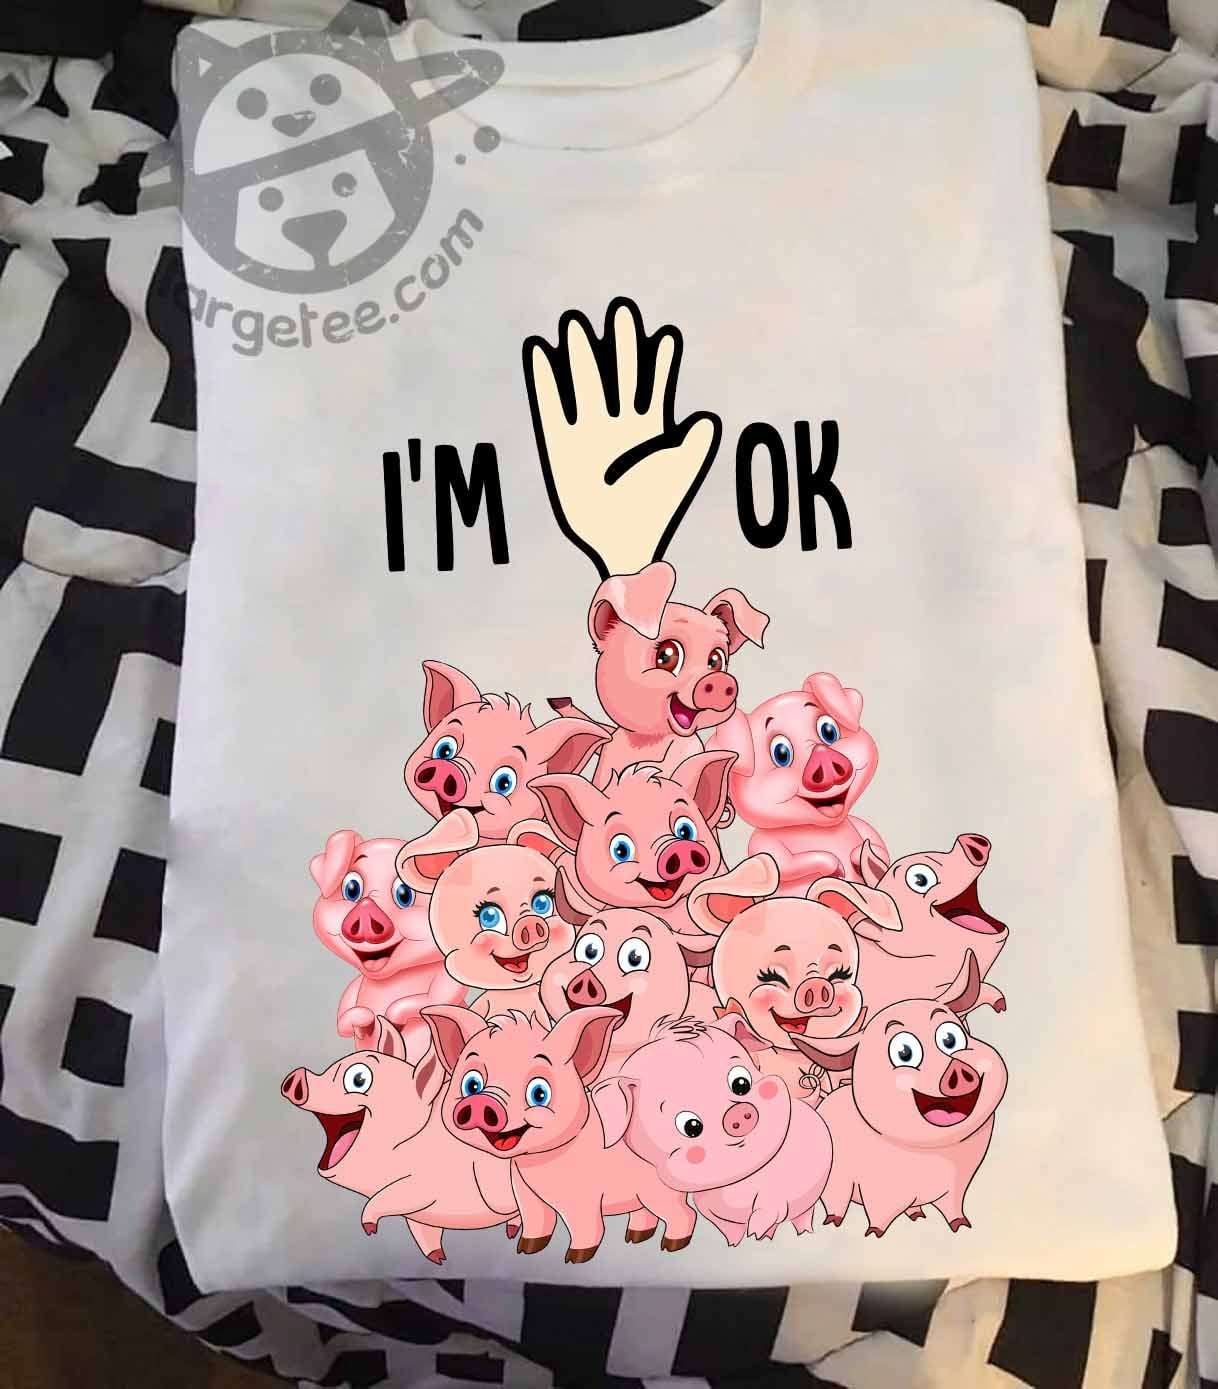 I'm ok - Person deep in pig, bunch of pigs, person loves pigs